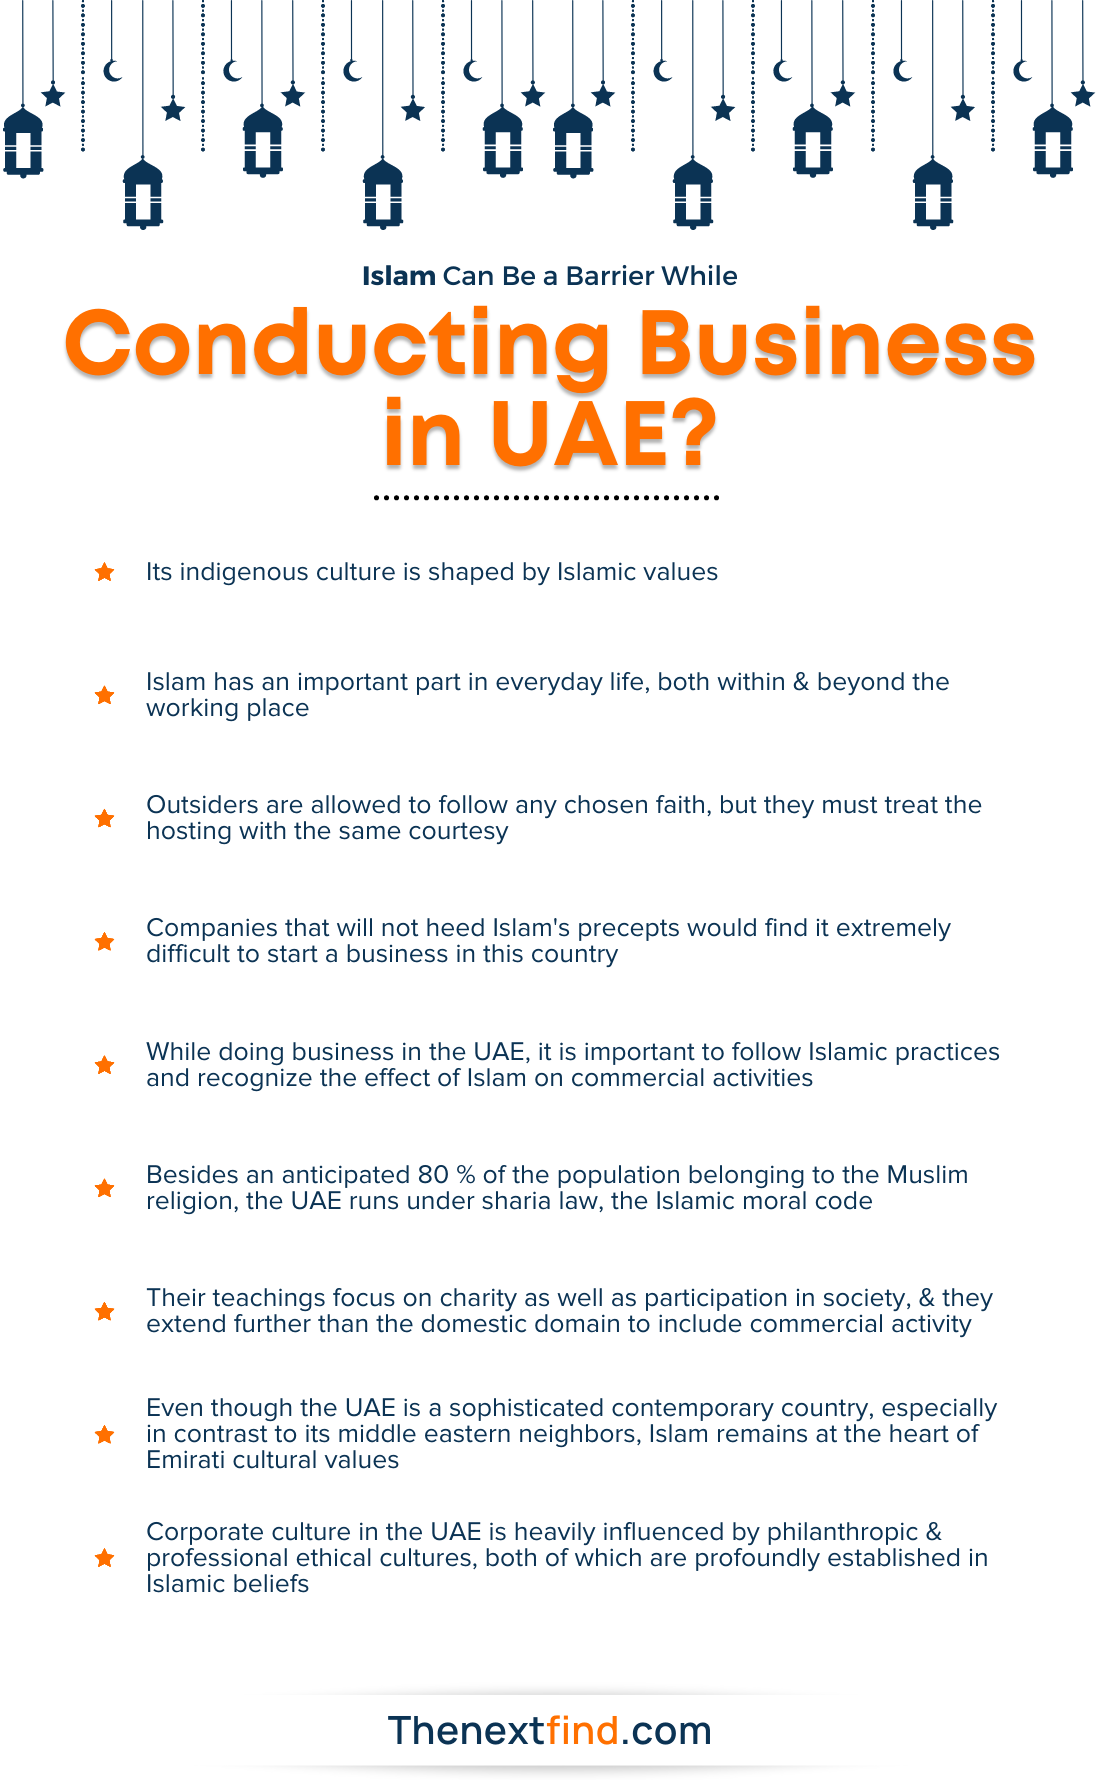 Islam Can Be a Barrier While Conducting Business UAE